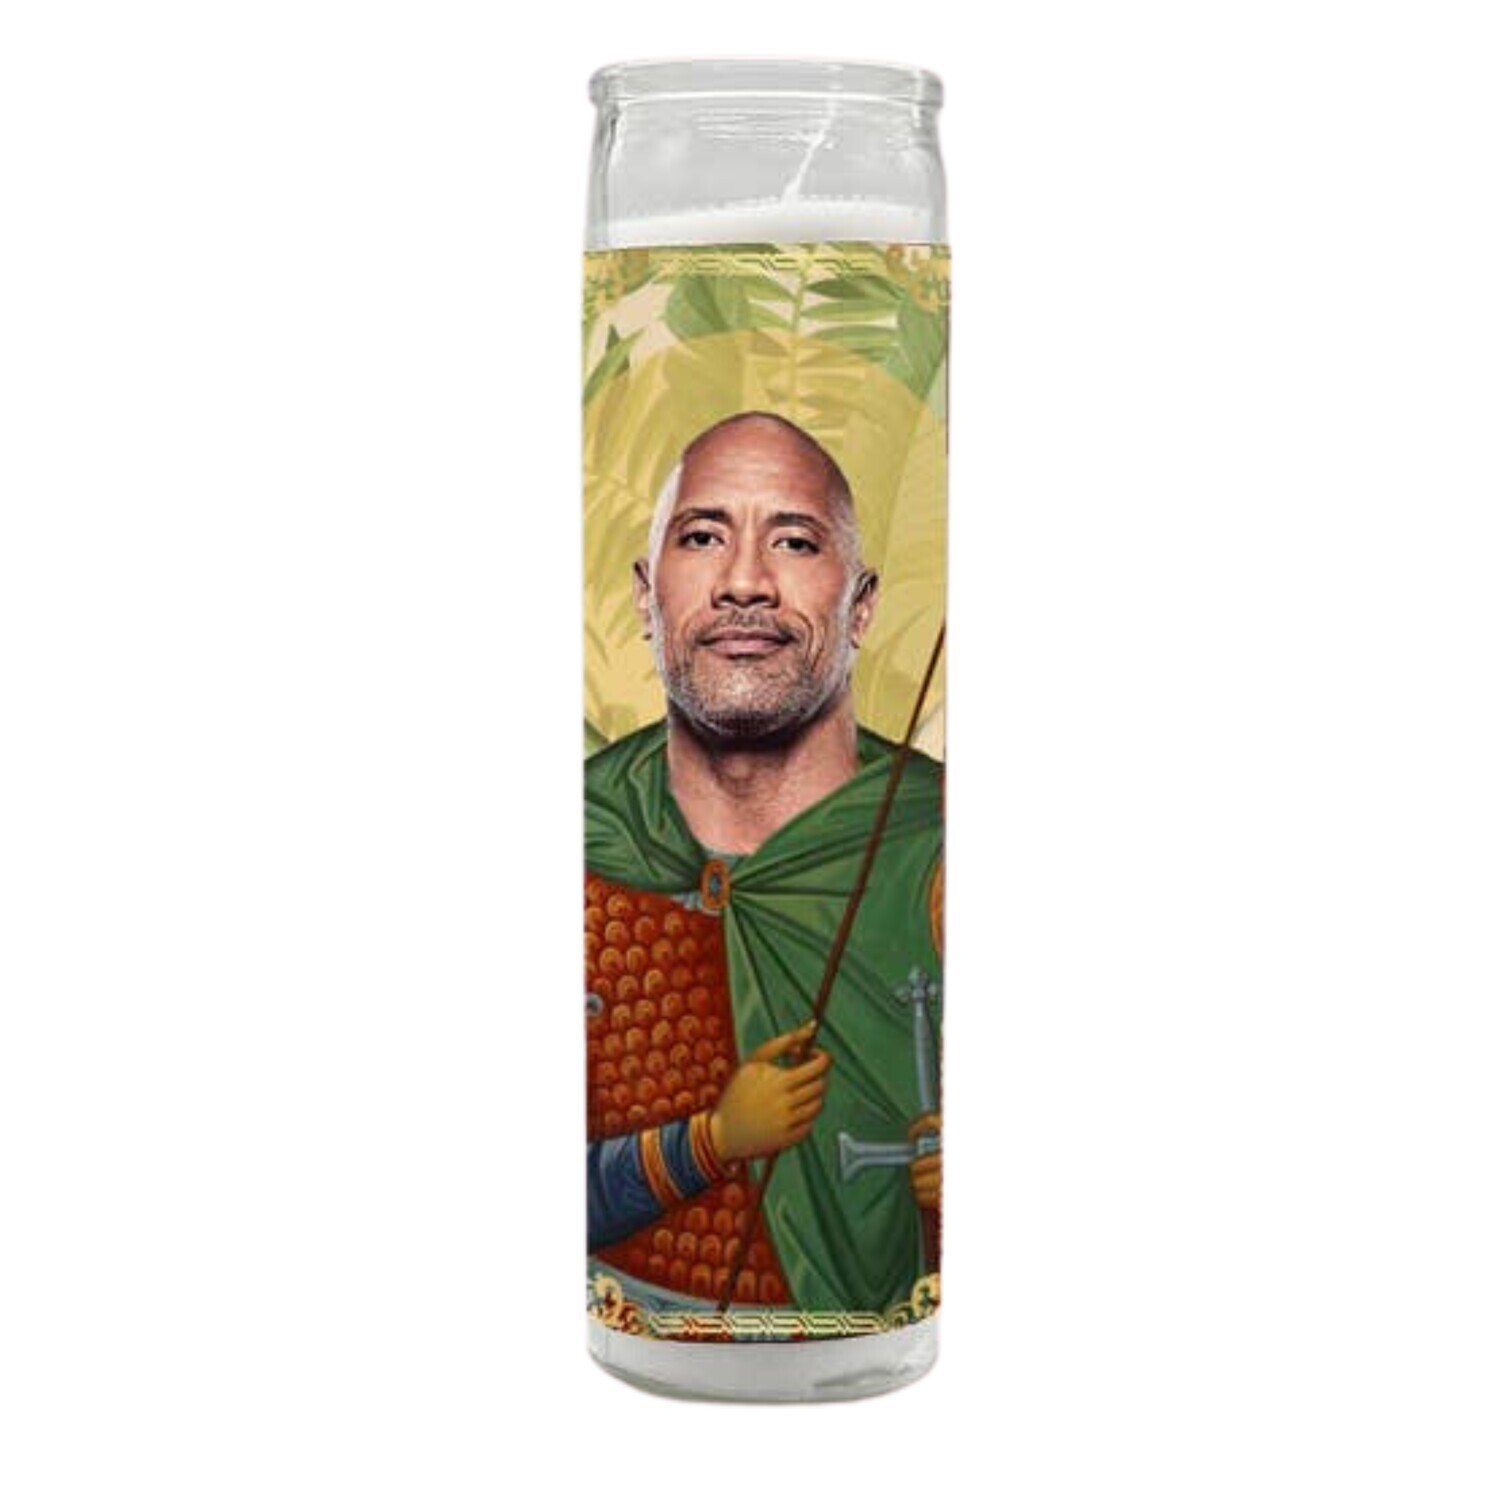 THE ROCK PRAYER CANDLE